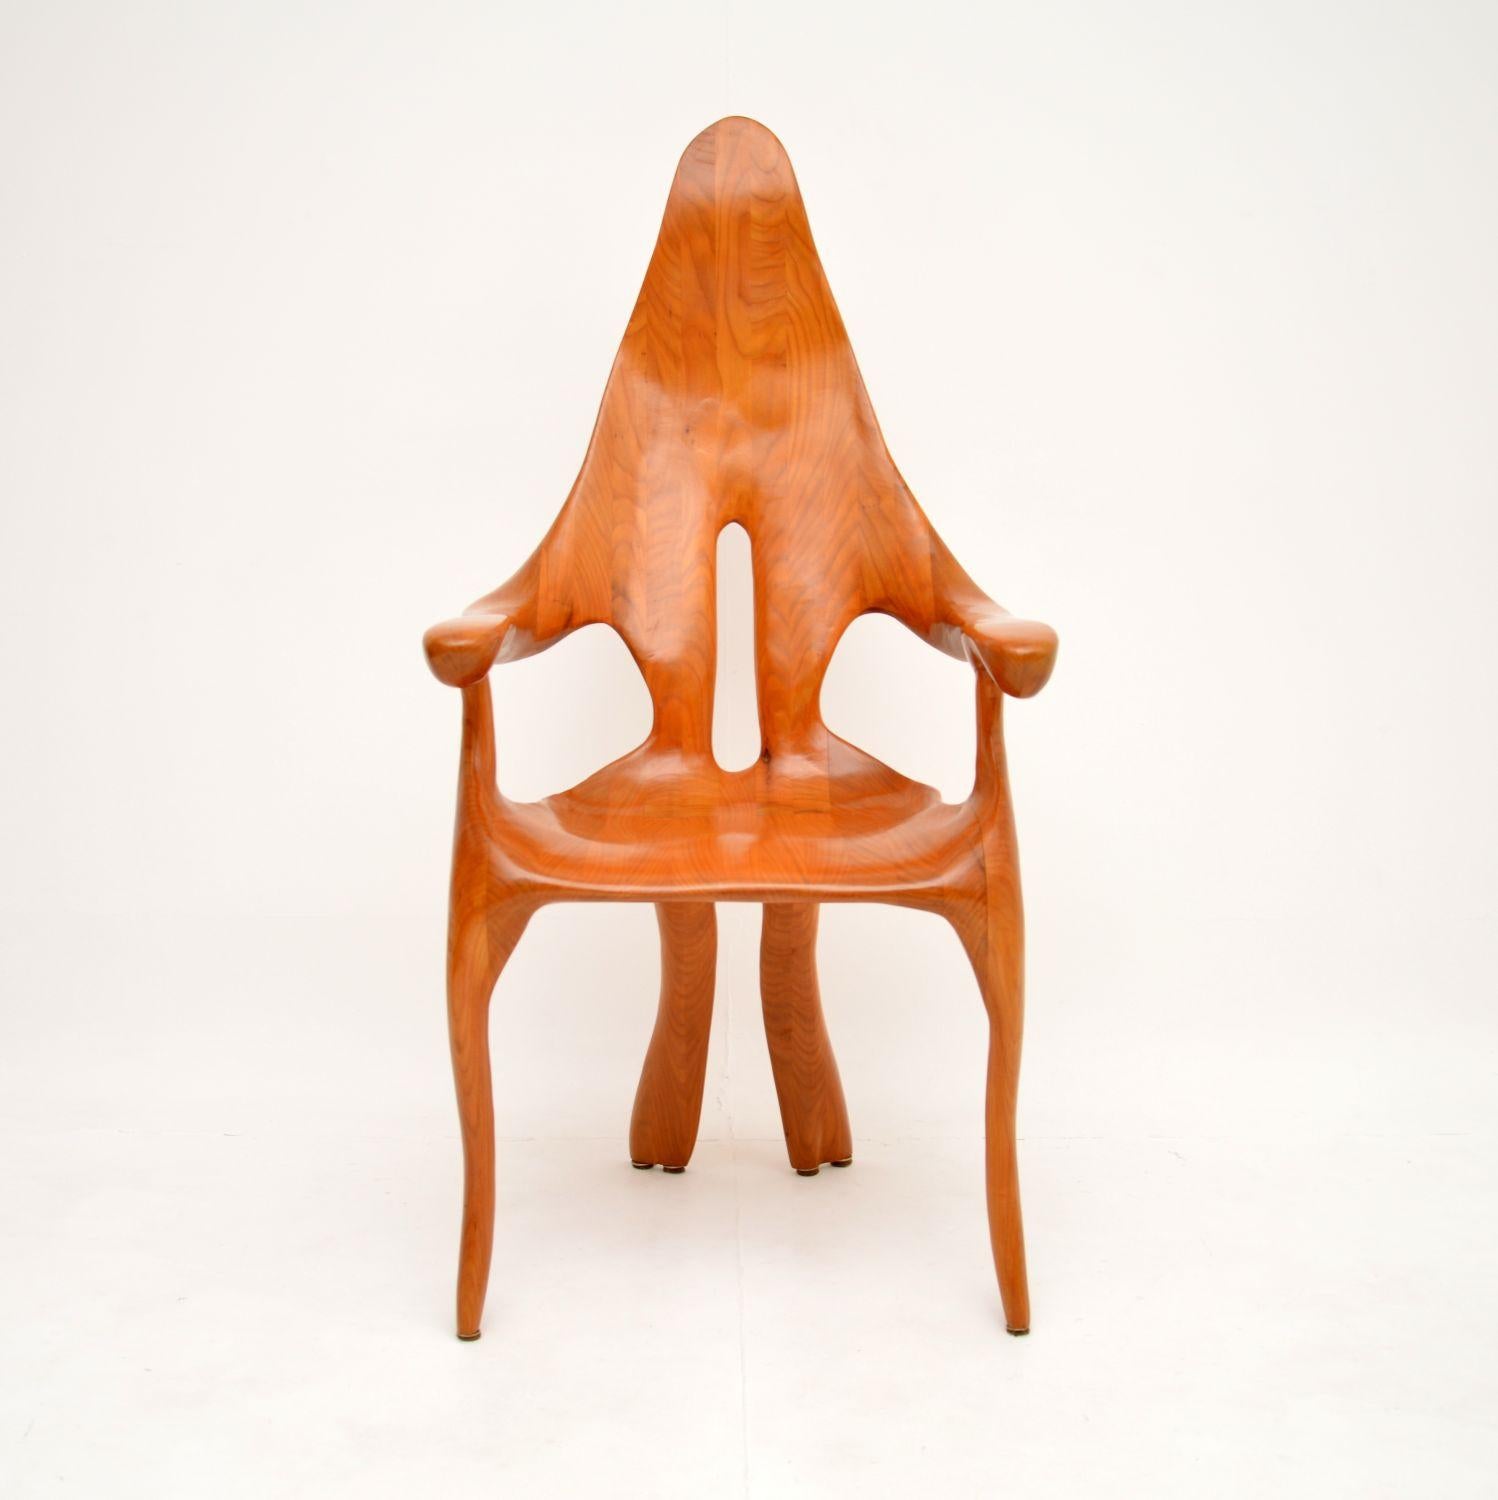 An exquisite 1970’s vintage Italian studio craft sculptural armchair, in the manner of Sam Maloof. This was recently imported from Italy, it dates from around the 1970’s.

It is of magnificent quality, with such a gorgeous sculptural design, you are